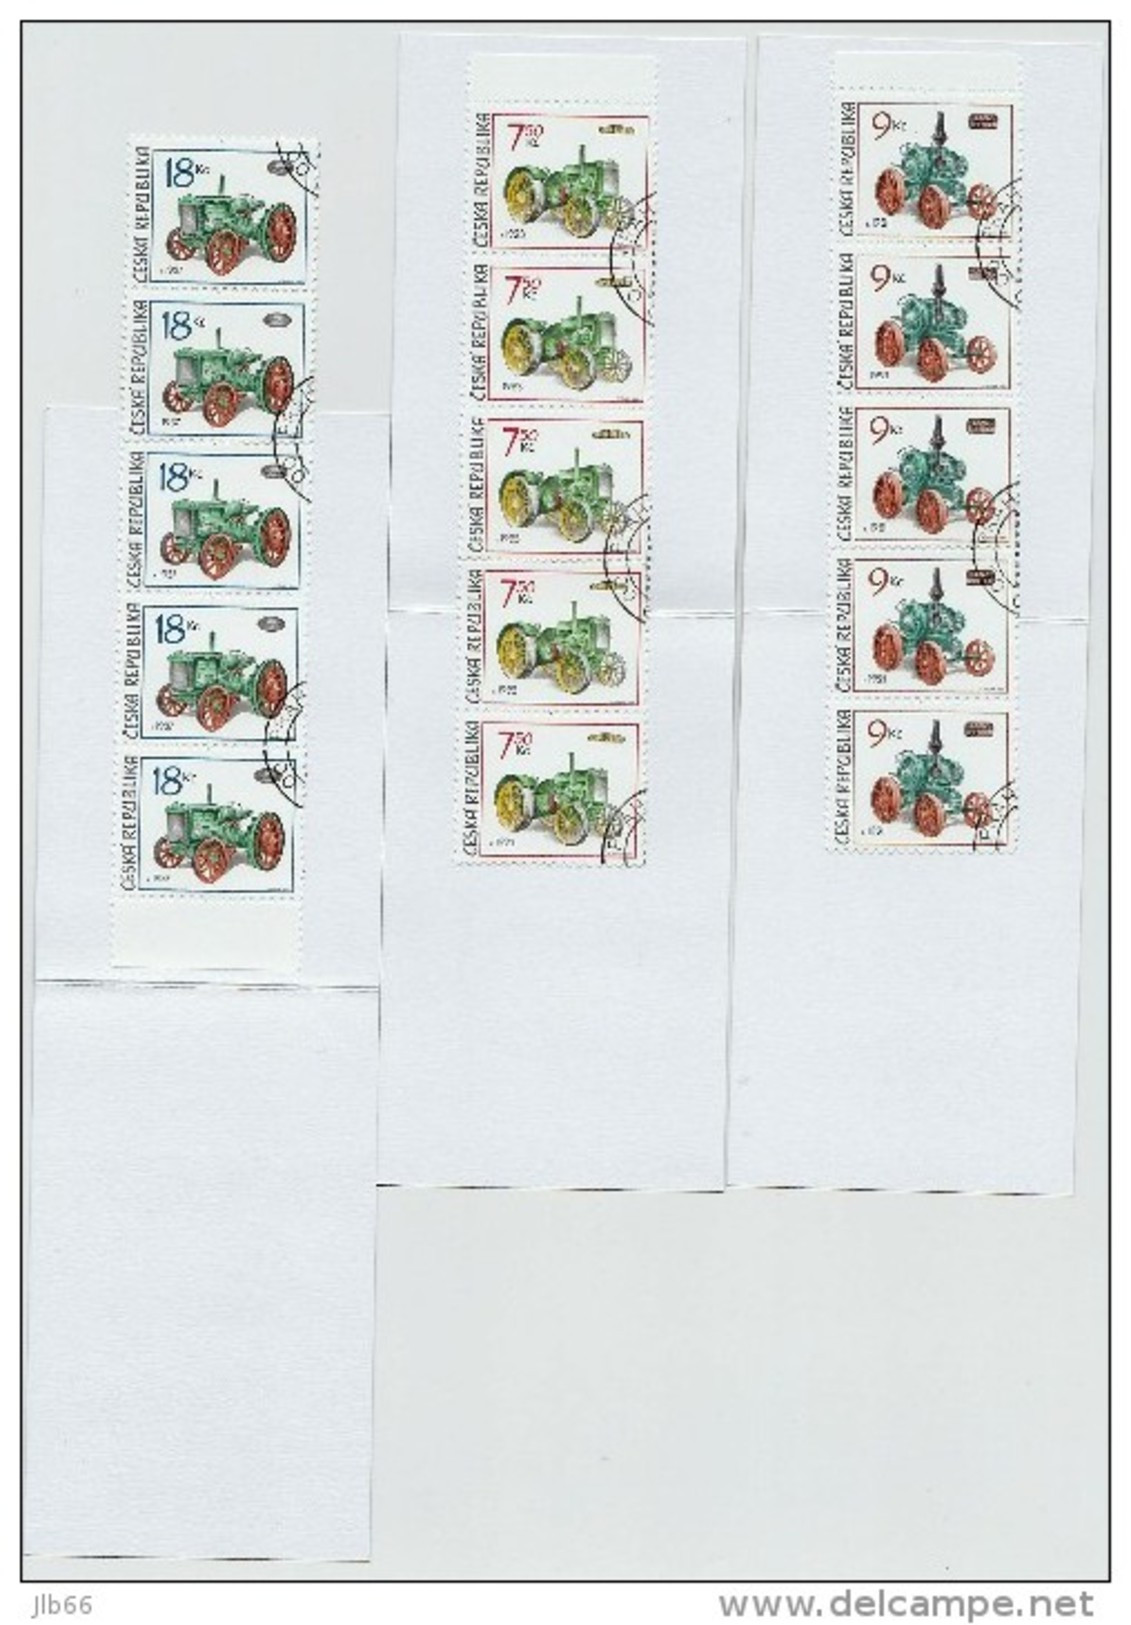 3 Carnets 2005 De 5 Timbres YT C 407/409 Tracteur Agricole / Booklet Michel MH 0-122/124 (446/448) Tractors - Used Stamps